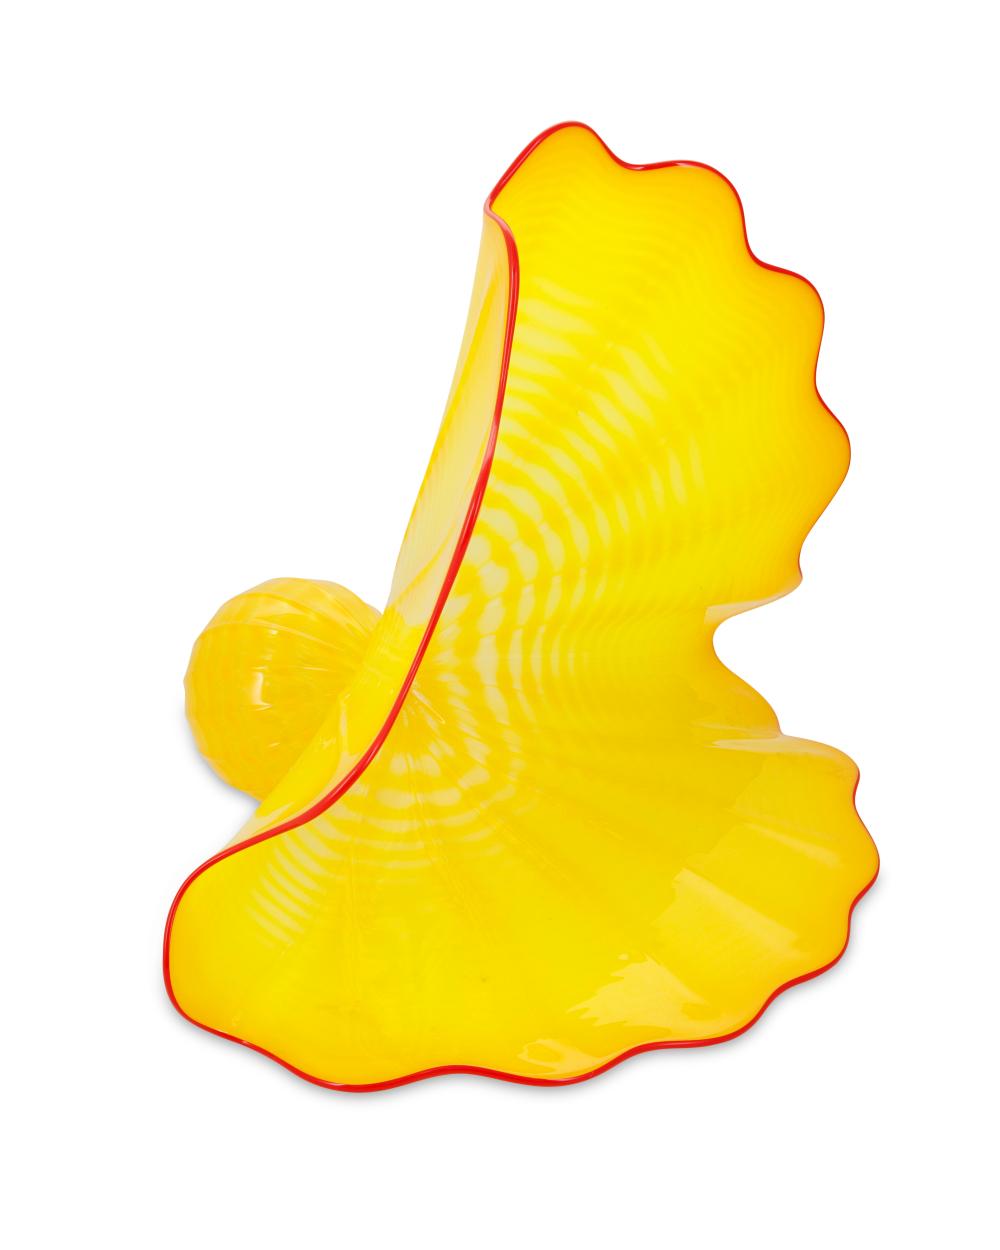 DALE CHIHULY B 1941 YELLOW 2eefe8